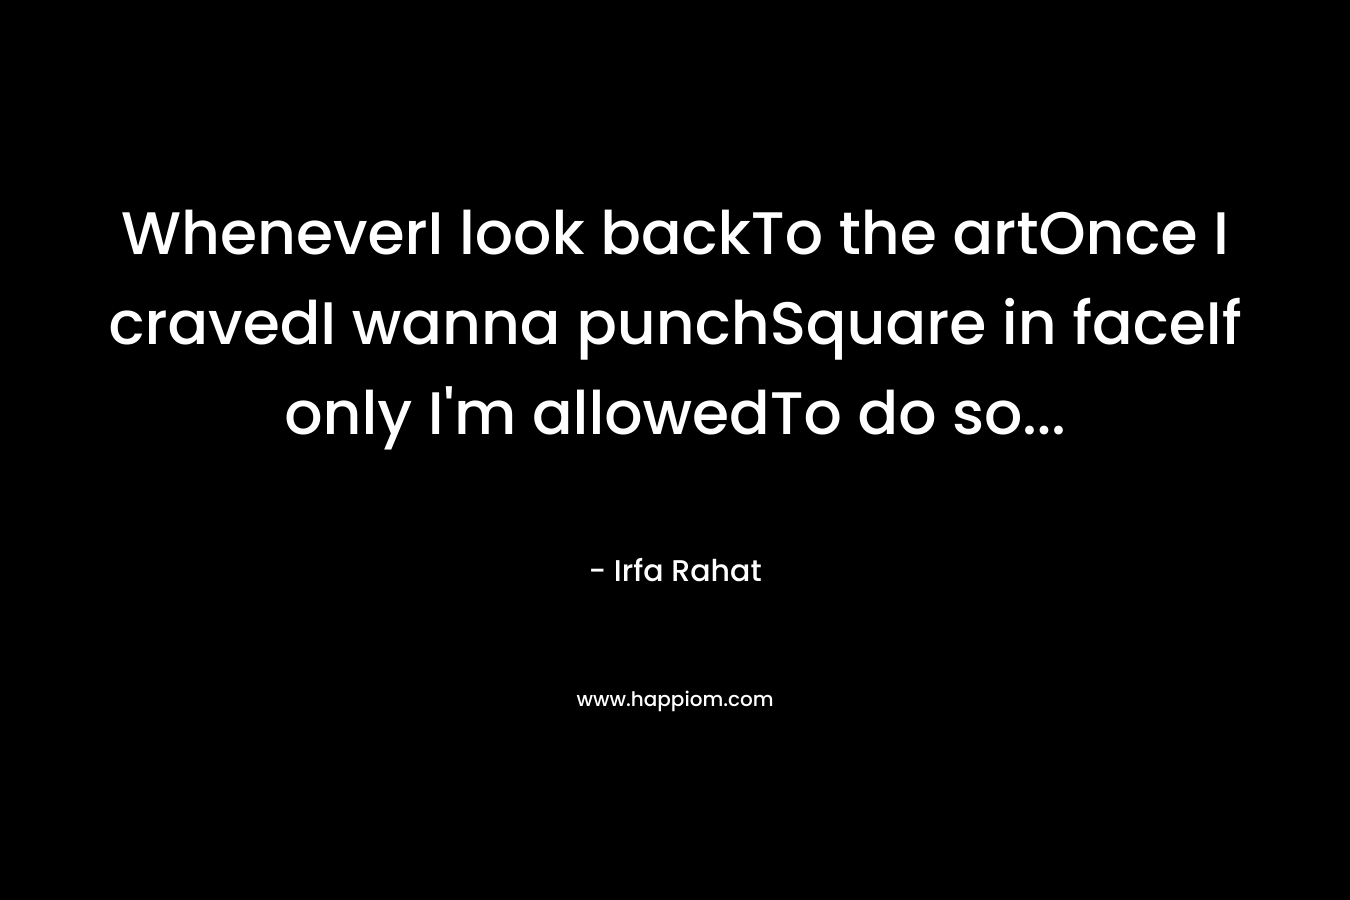 WheneverI look backTo the artOnce I cravedI wanna punchSquare in faceIf only I’m allowedTo do so… – Irfa Rahat